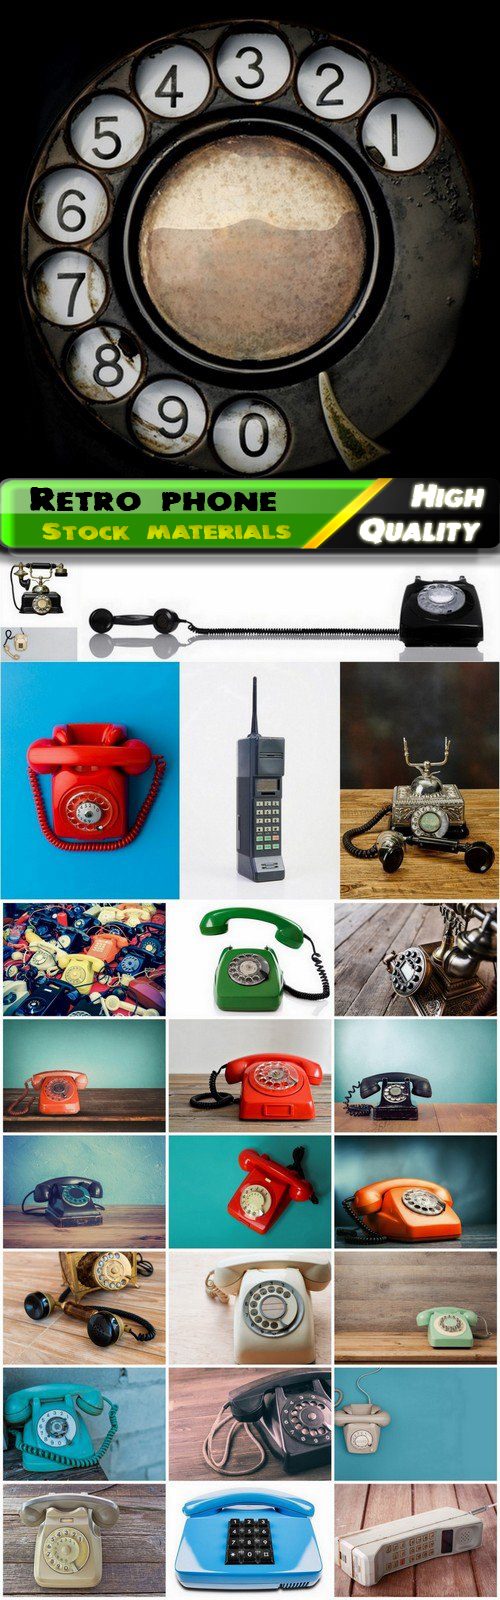 Retro phone communication and mobile satellite connection 25 Eps